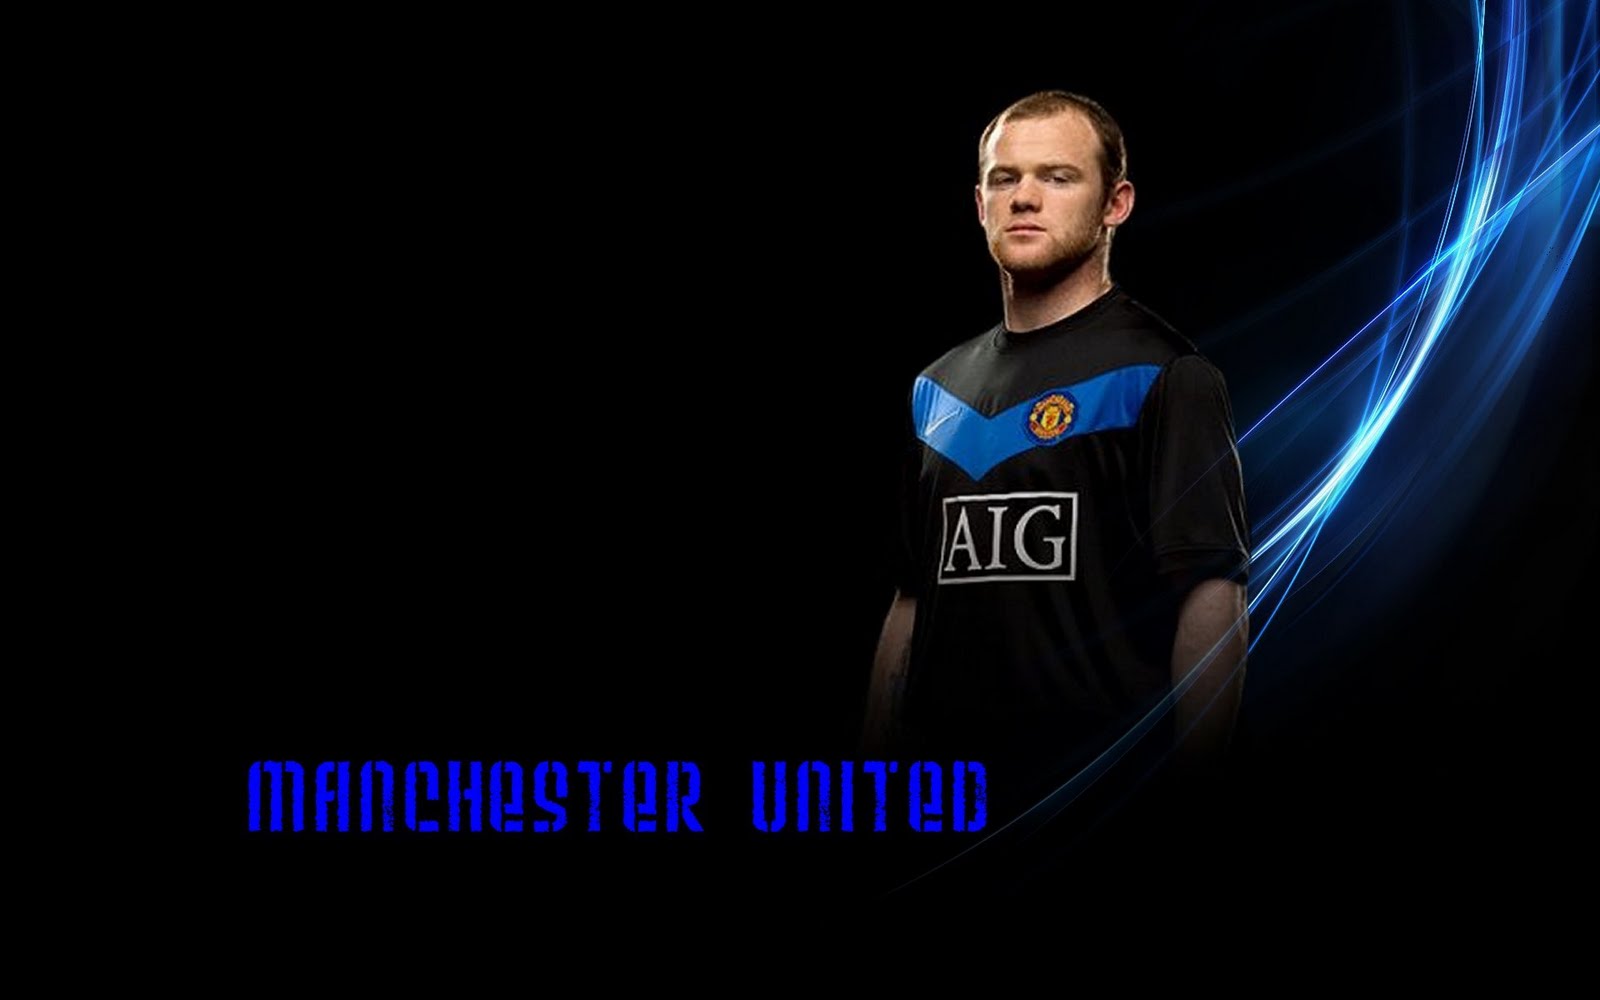 All Wallpapers Wayne Rooney hd Wallpapers 2013 1600x1000